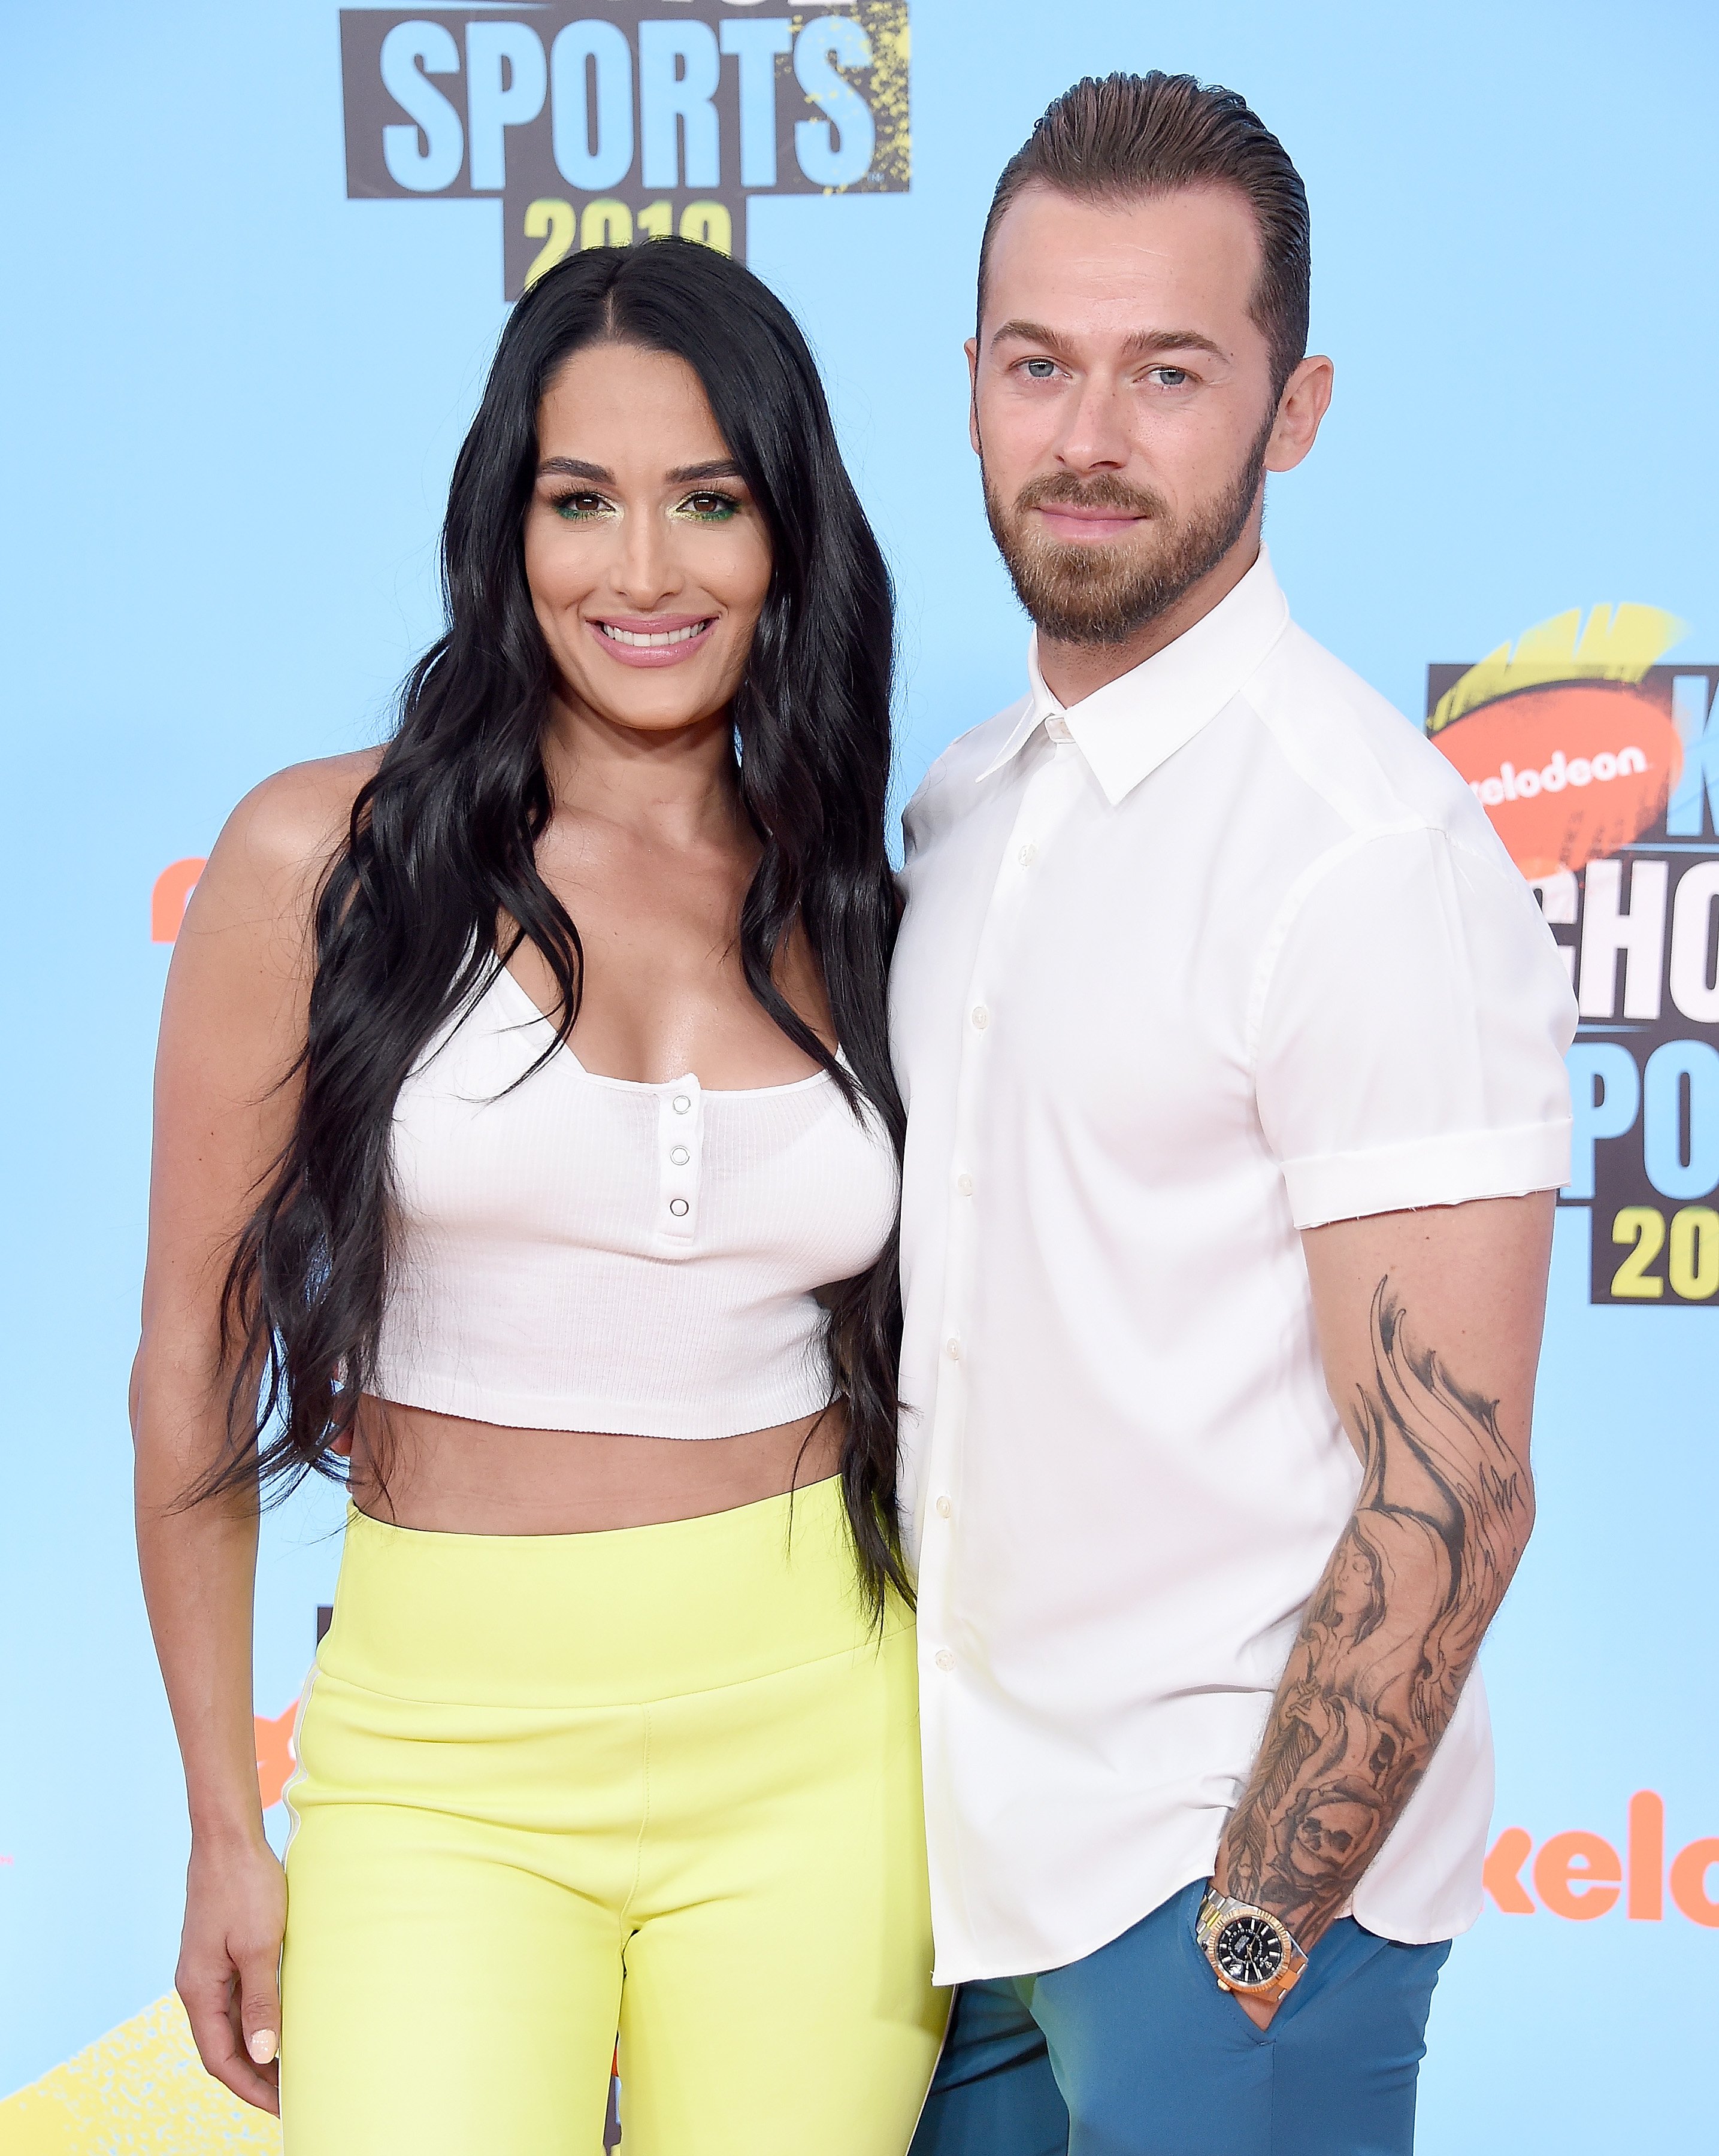 Nikki Bella and Artem Chigvintsev during the 2019 Nickelodeon sports event. | Photo: Getty Images